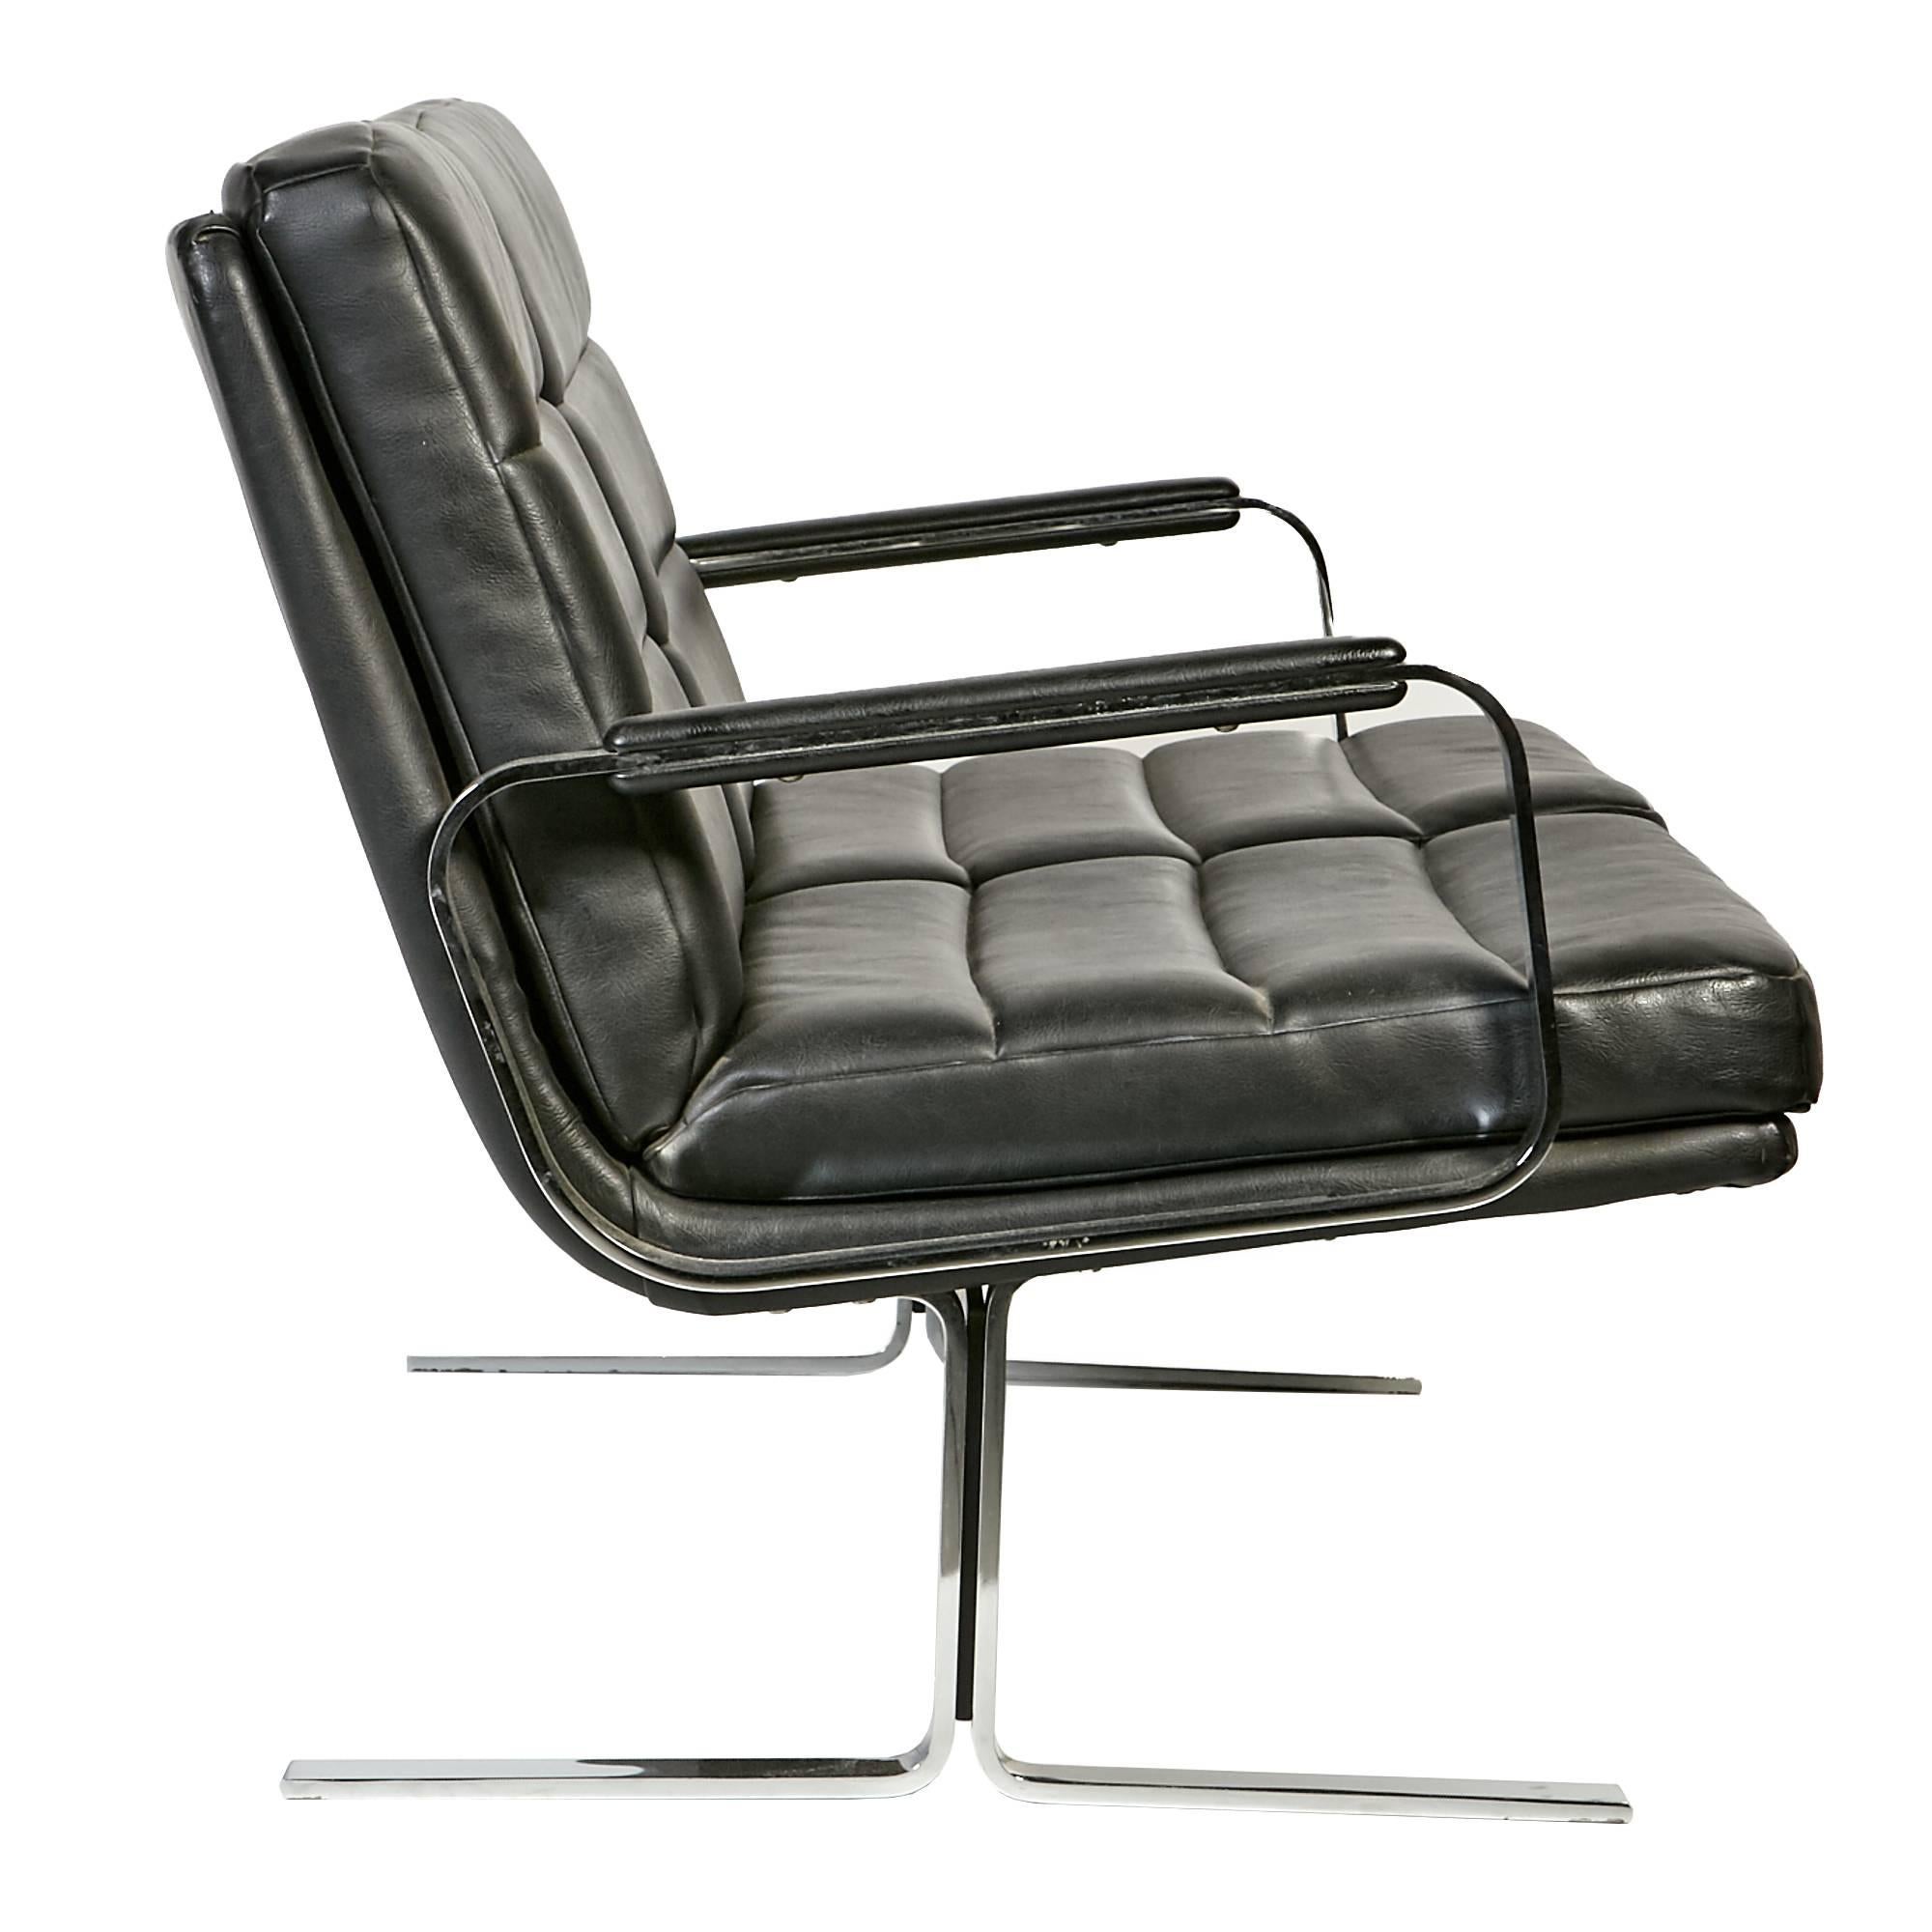 1970s Airport-Style Living Room Set by Bernd Münzebrock for Knoll In Excellent Condition For Sale In Amherst, NH